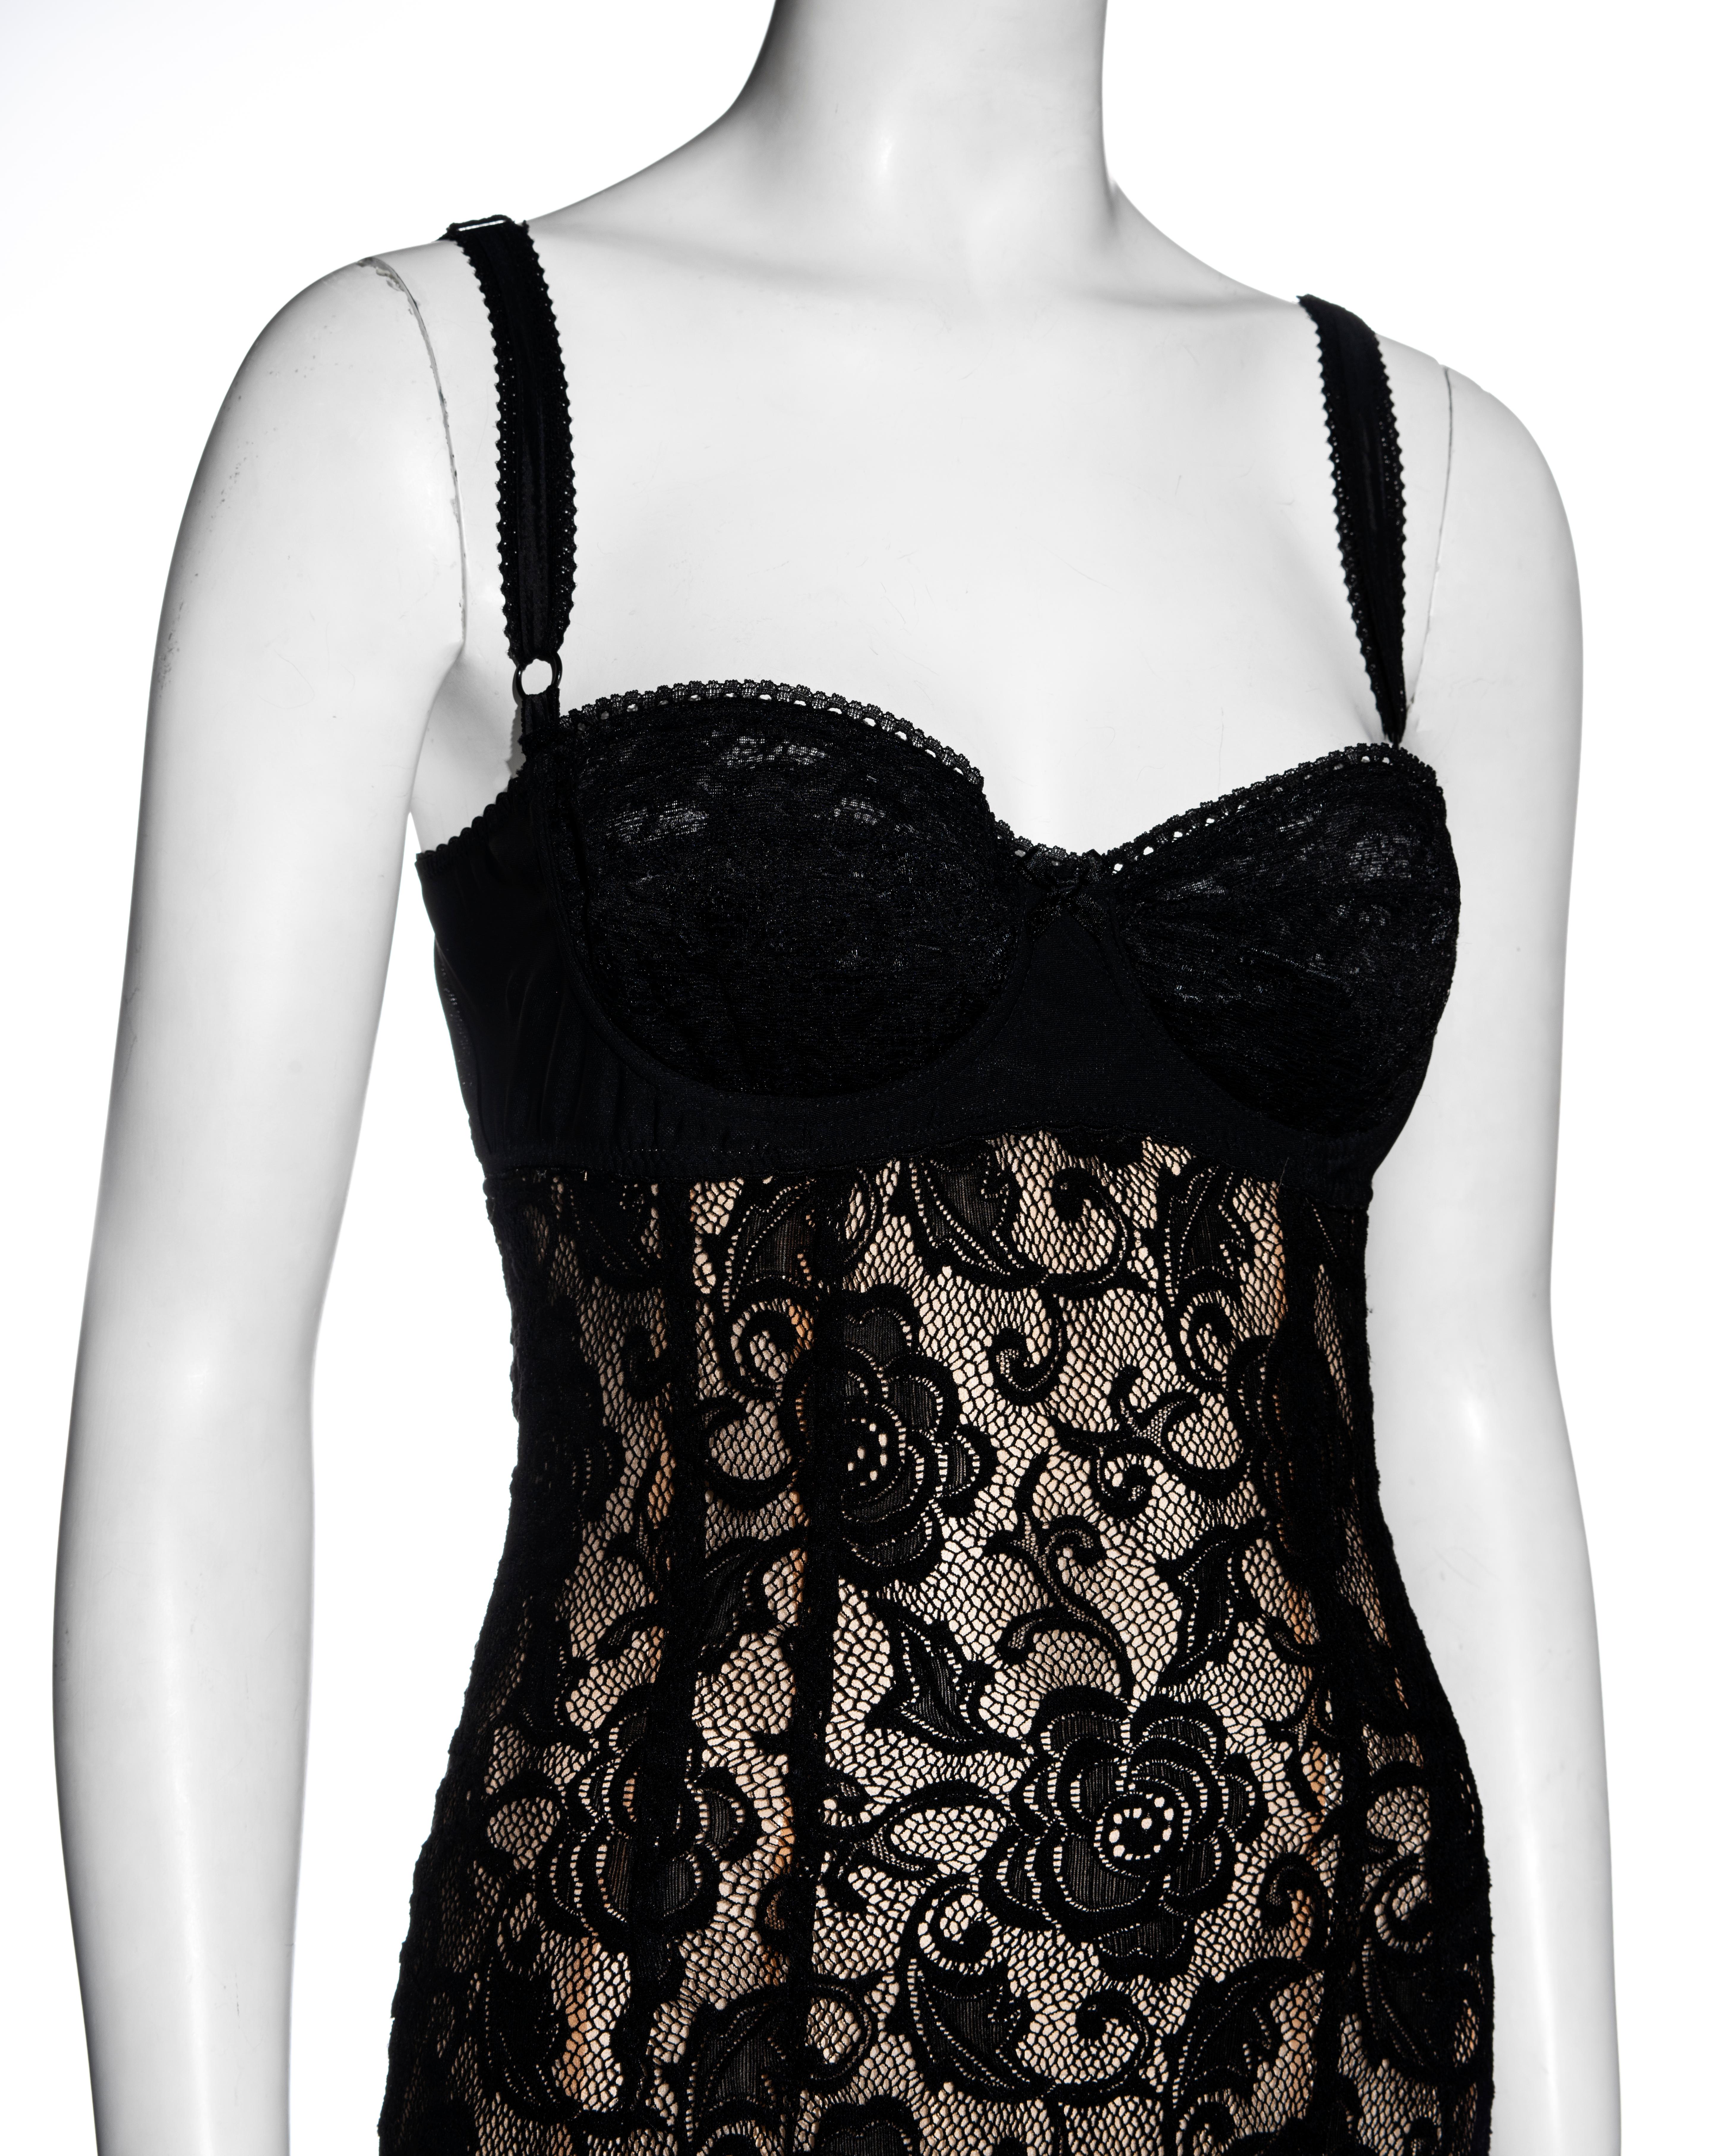 Women's Dolce & Gabbana black lace evening dress with attached bra, ss 1997 For Sale